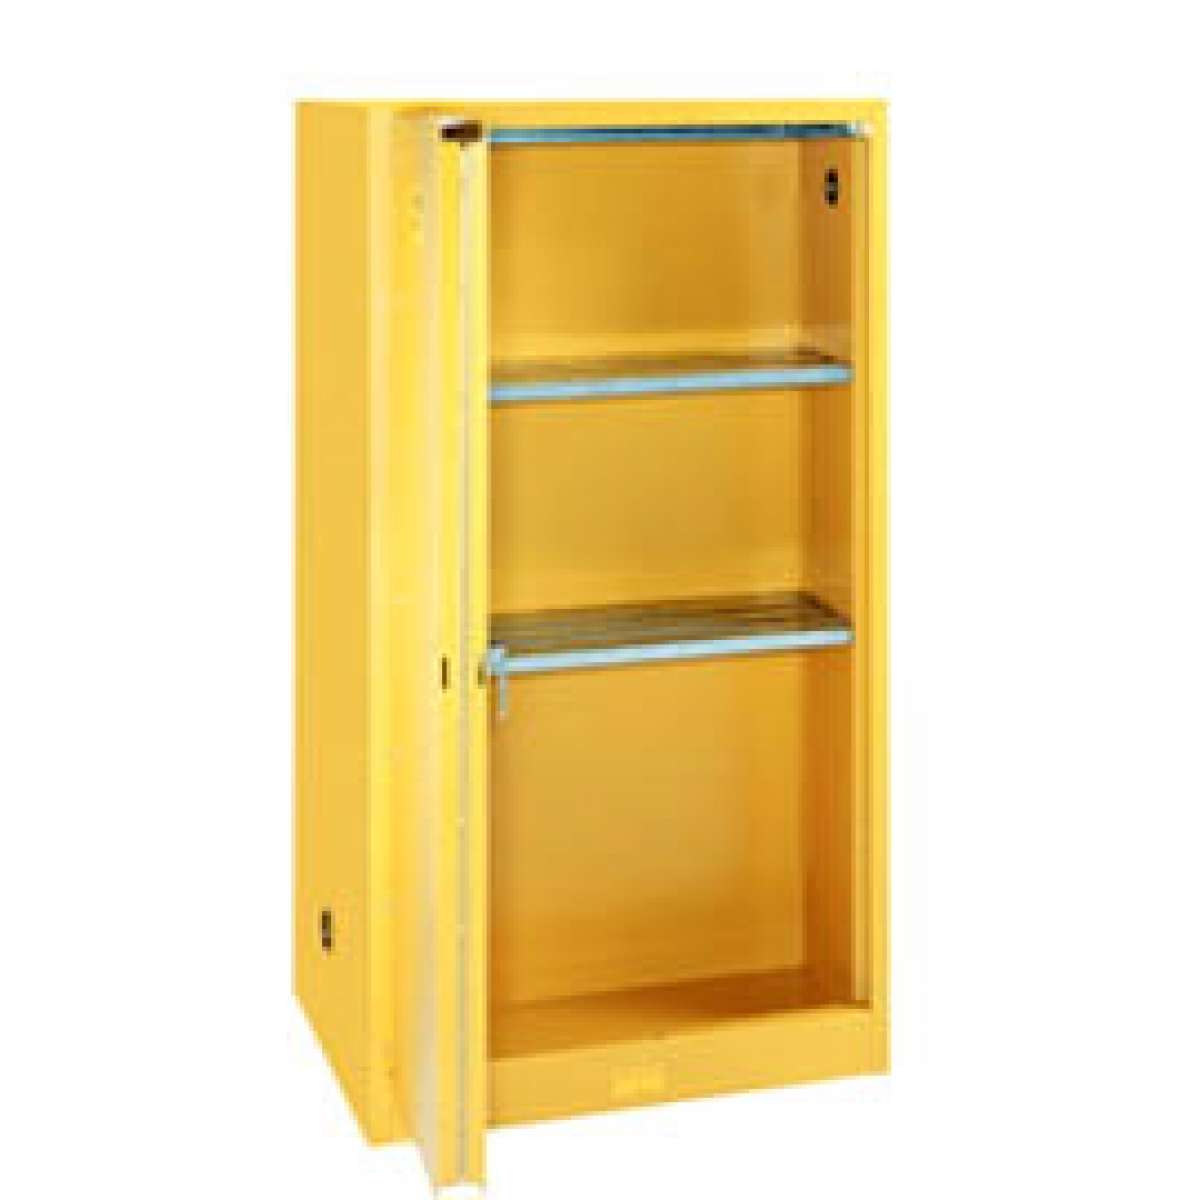 Insights into the Worldwide Safety Cabinets Market 2020-2026 : Eagle Manufacturing, ESCO, Thermo Fisher Scientific, AIRTECH, Telstar Life-Sciences